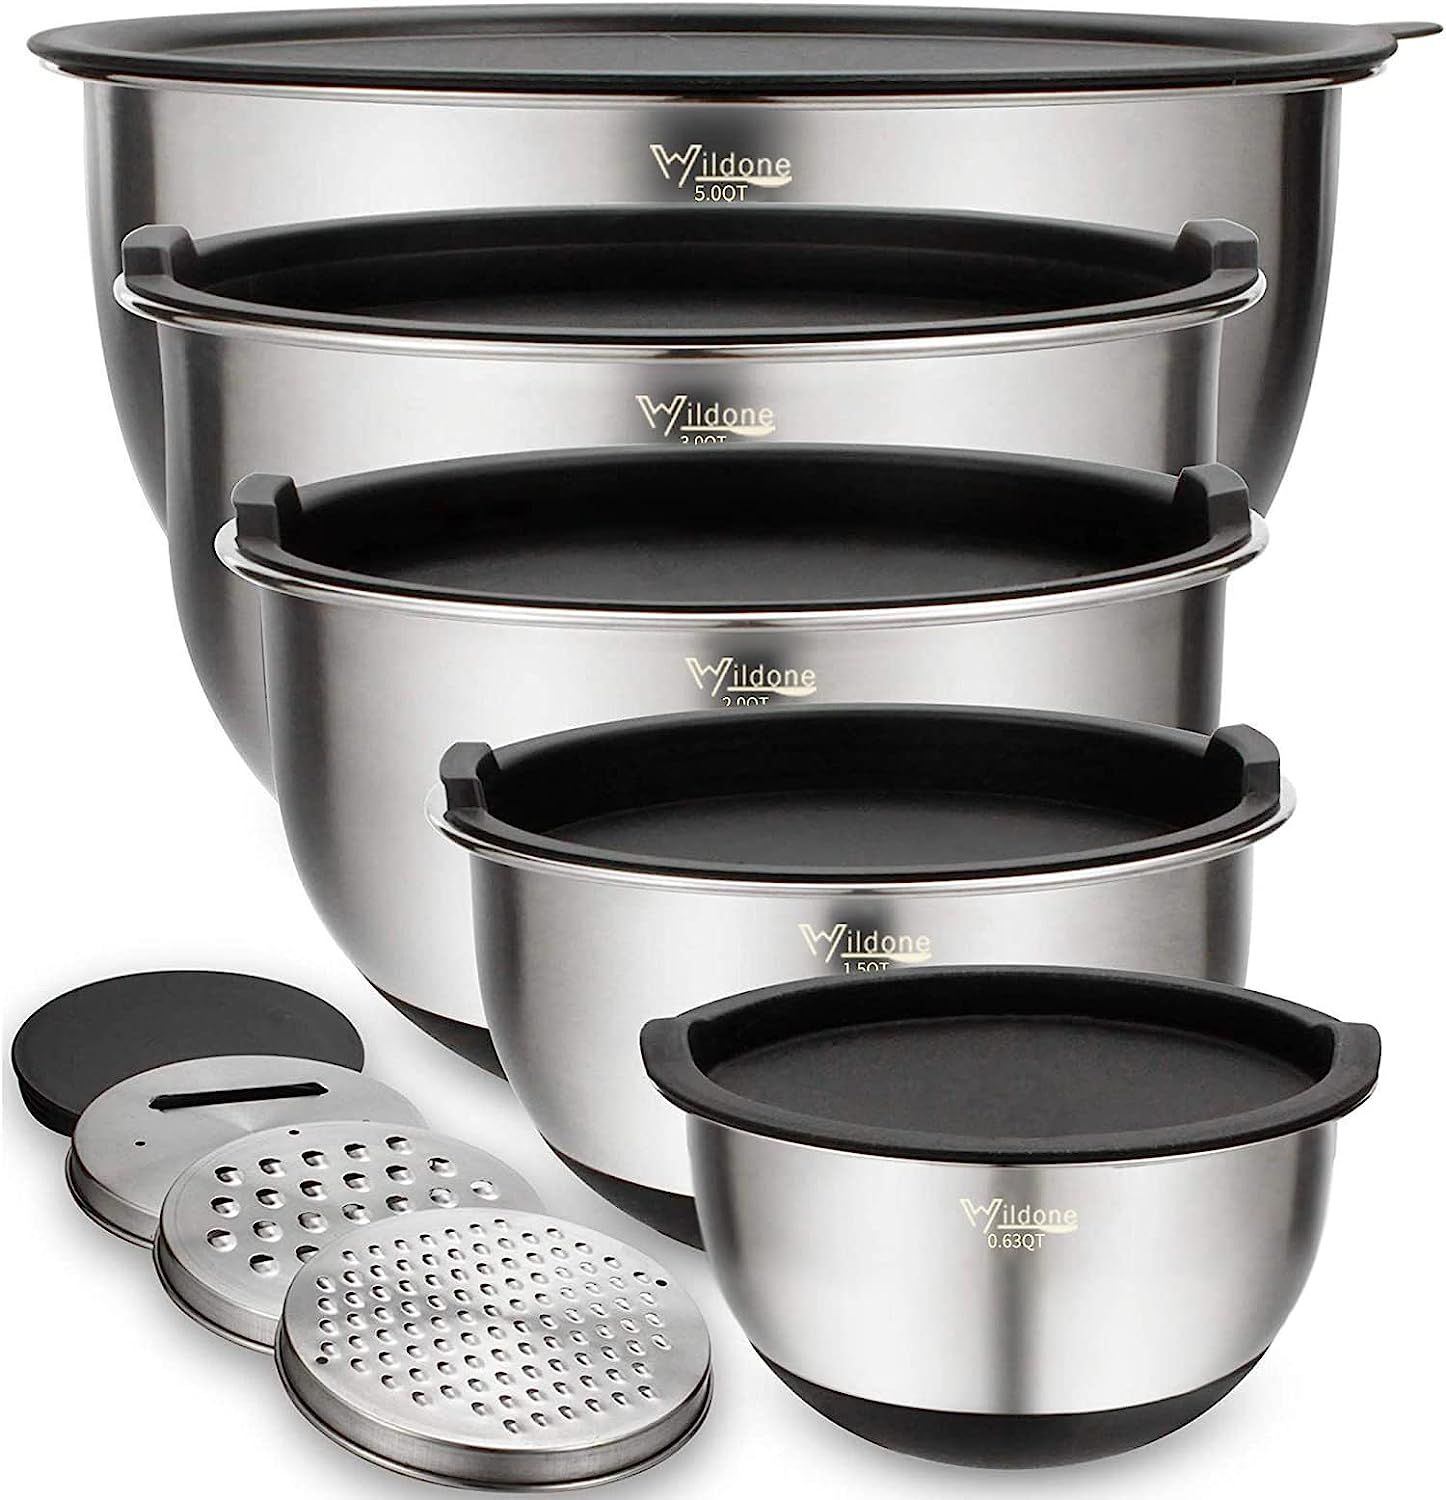 Wildone Mixing Bowls Set of 5, Stainless Steel Nesting Bowls with Lids, 3 Grater Attachments, Mea... | Amazon (US)